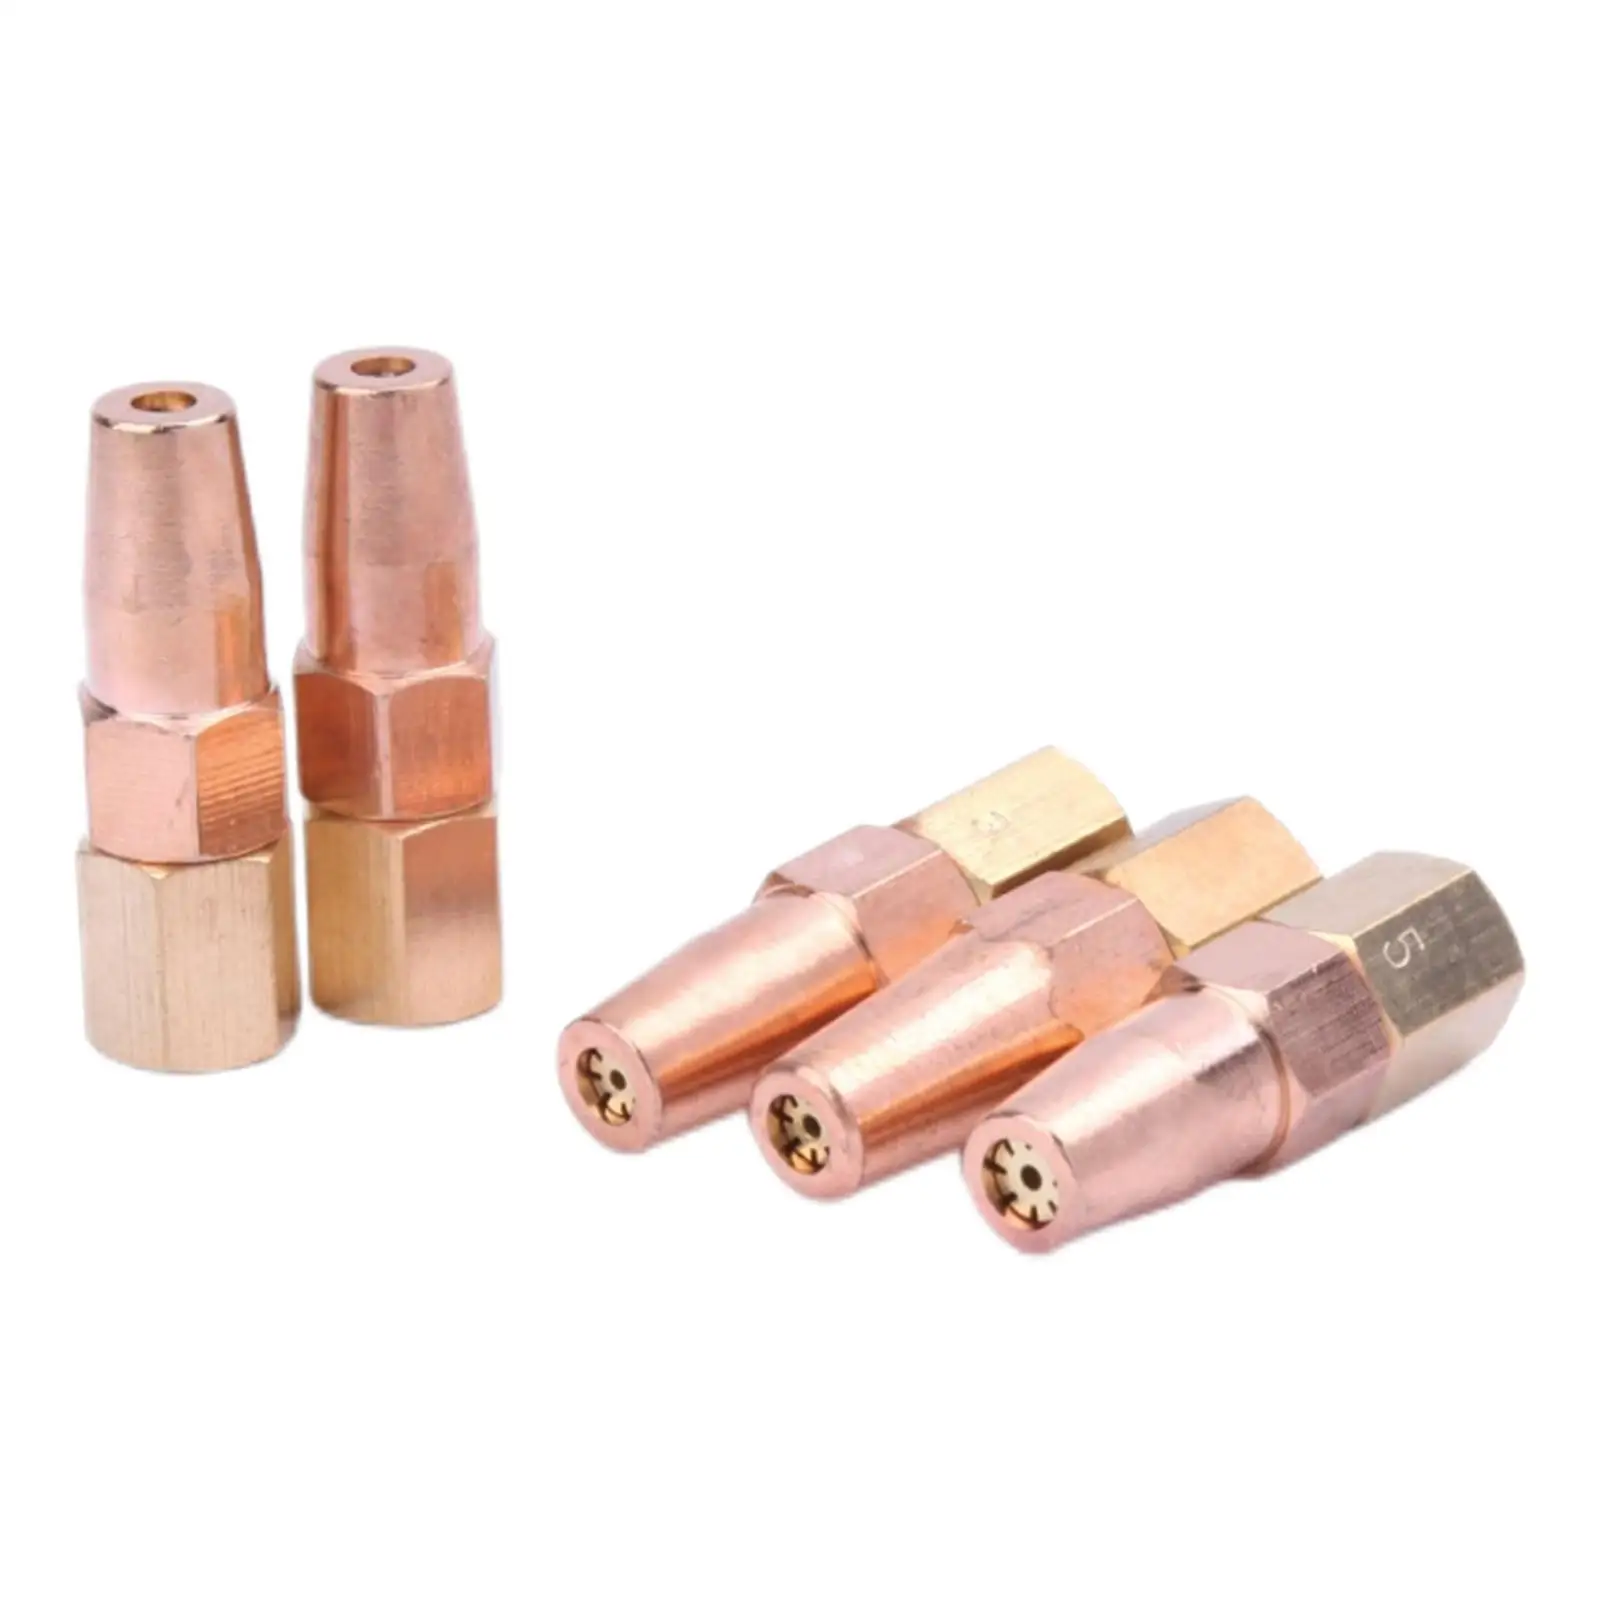 5x Propane Gas Welding Nozzle H01-6 Gas Nozzle Heating Nozzle Tip for Heat Treating Metal Bending Thermal Metal Expansion